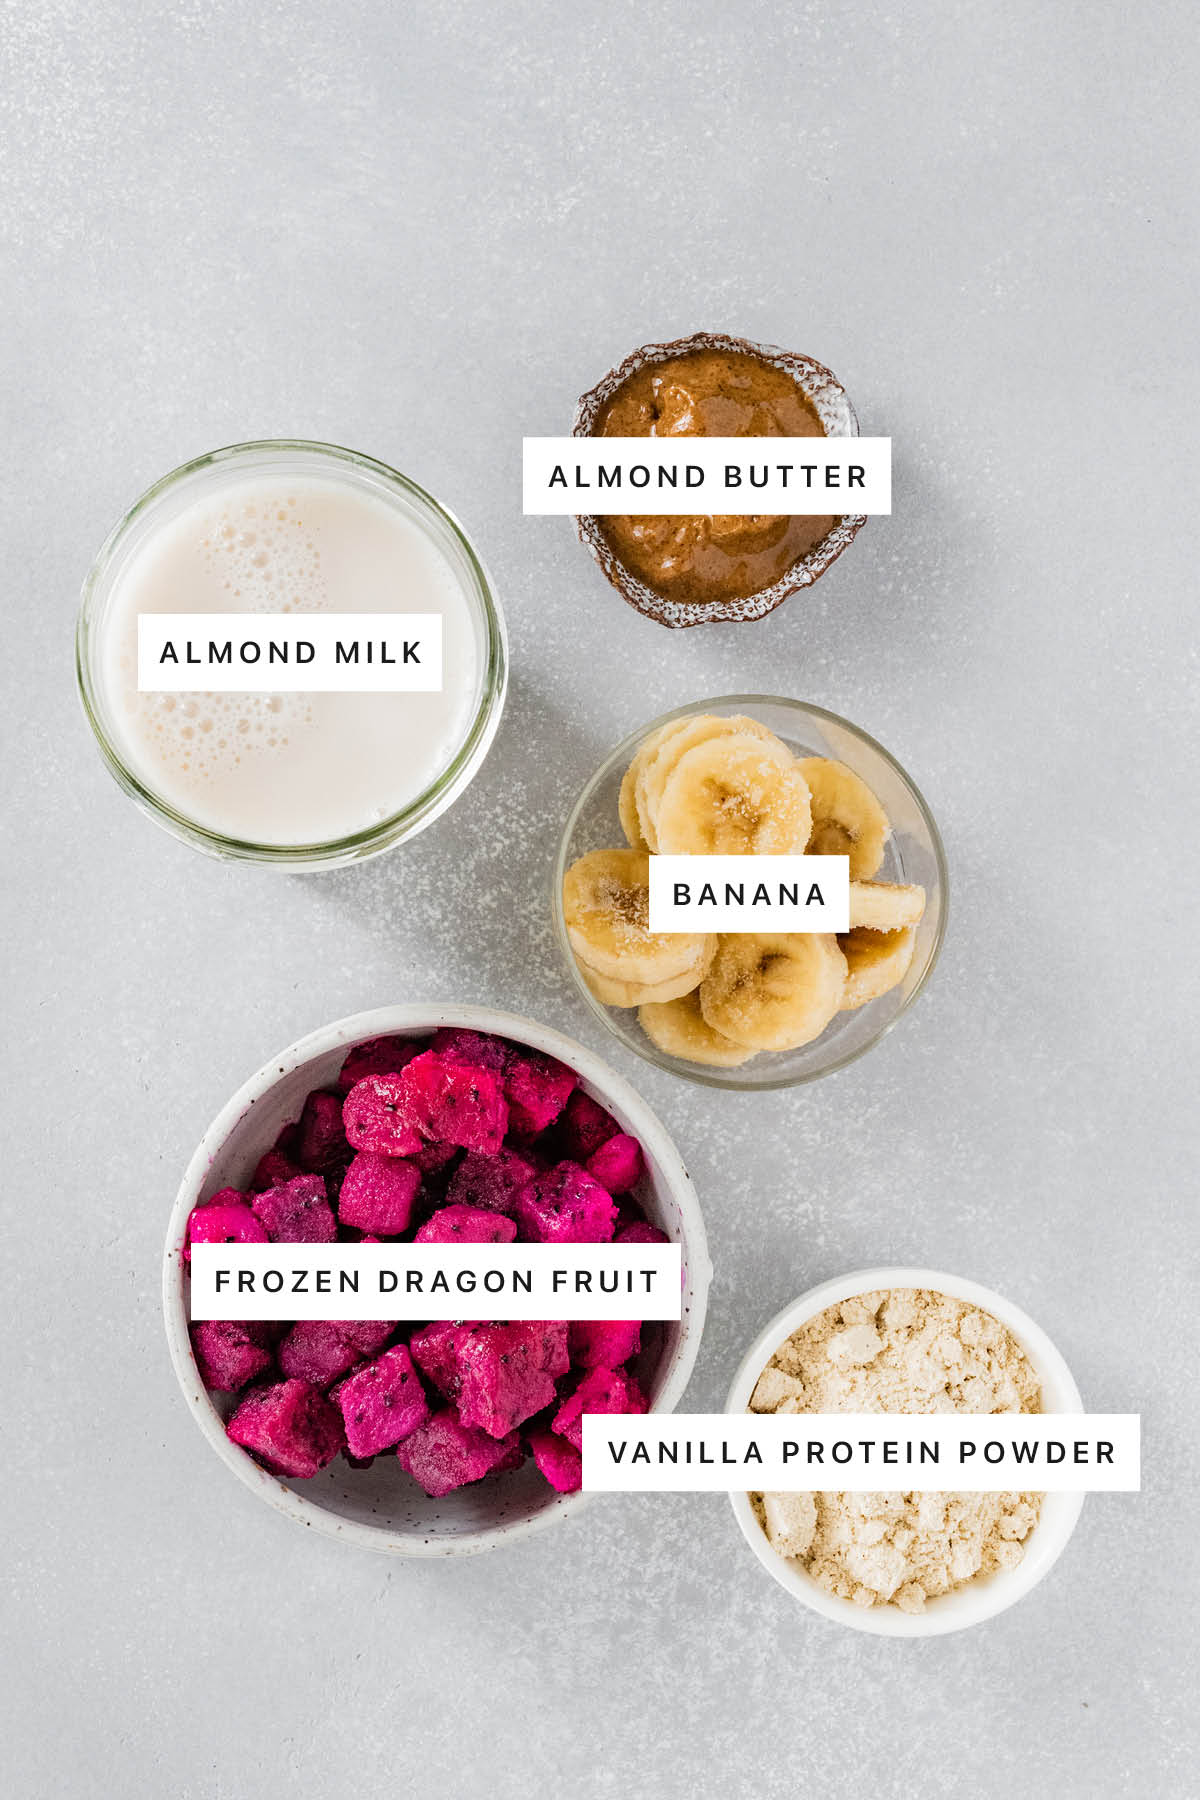 Ingredients measured out to make a Dragon Fruit Smoothie: almond butter, almond milk, banana, frozen dragon fruit and vanilla protein powder.